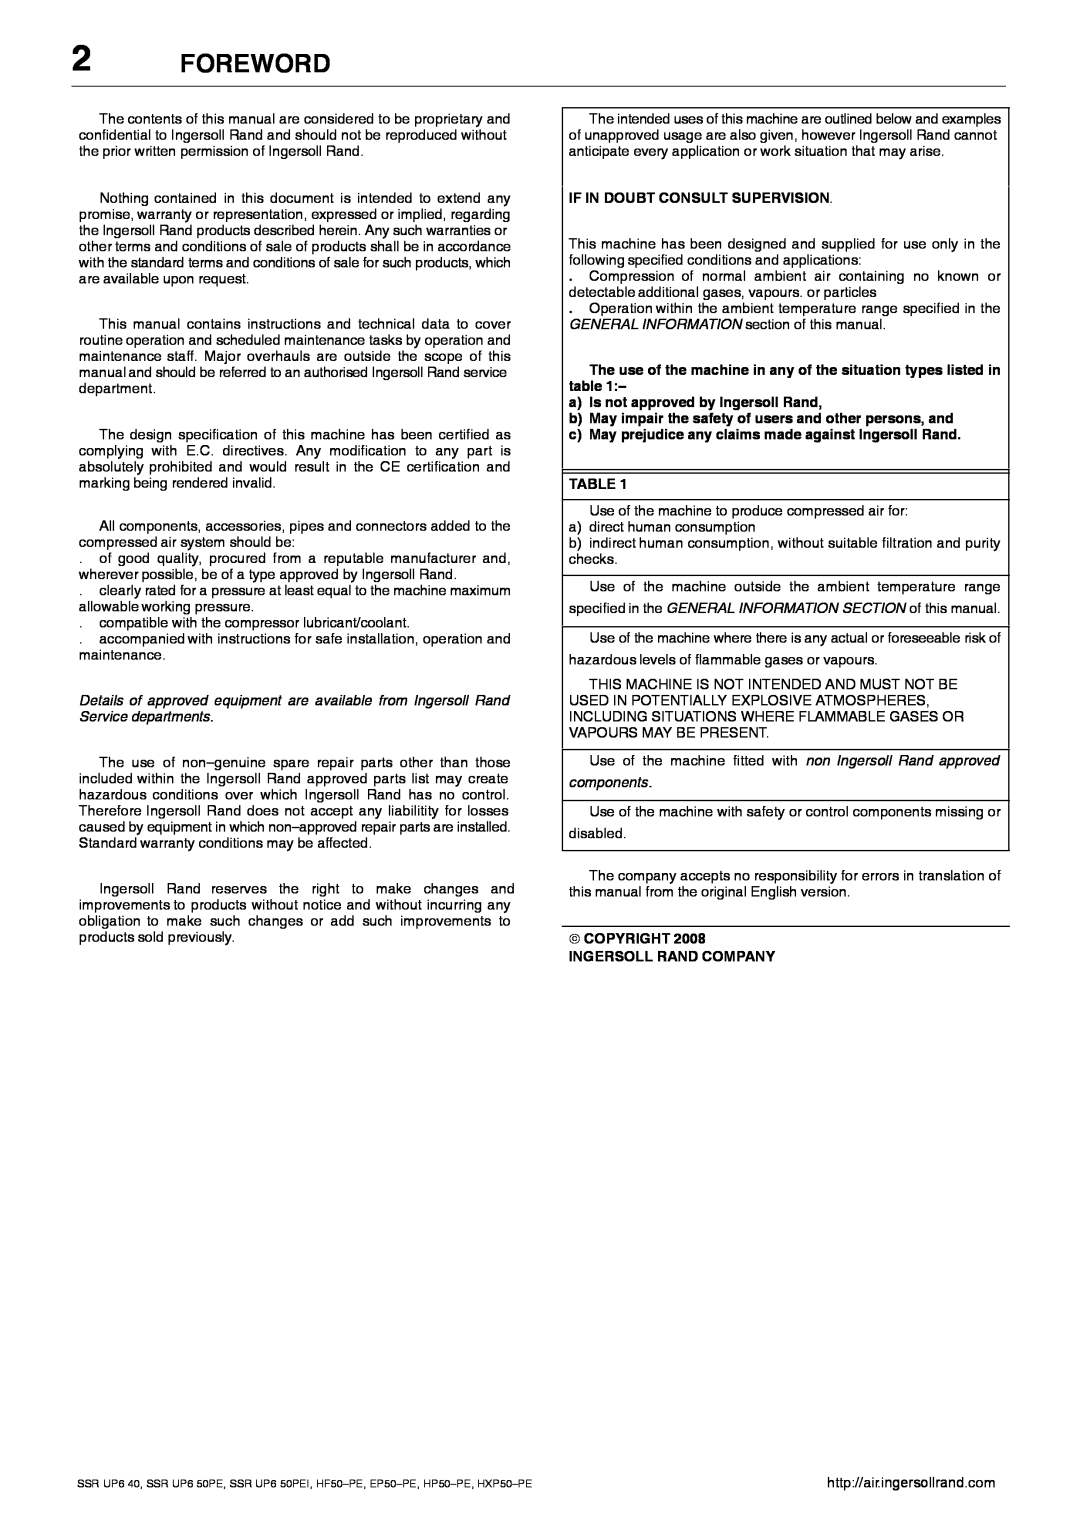 Ingersoll-Rand HXP50-PE manual Foreword, If In Doubt Consult Supervision, a Is not approved by Ingersoll Rand, components 